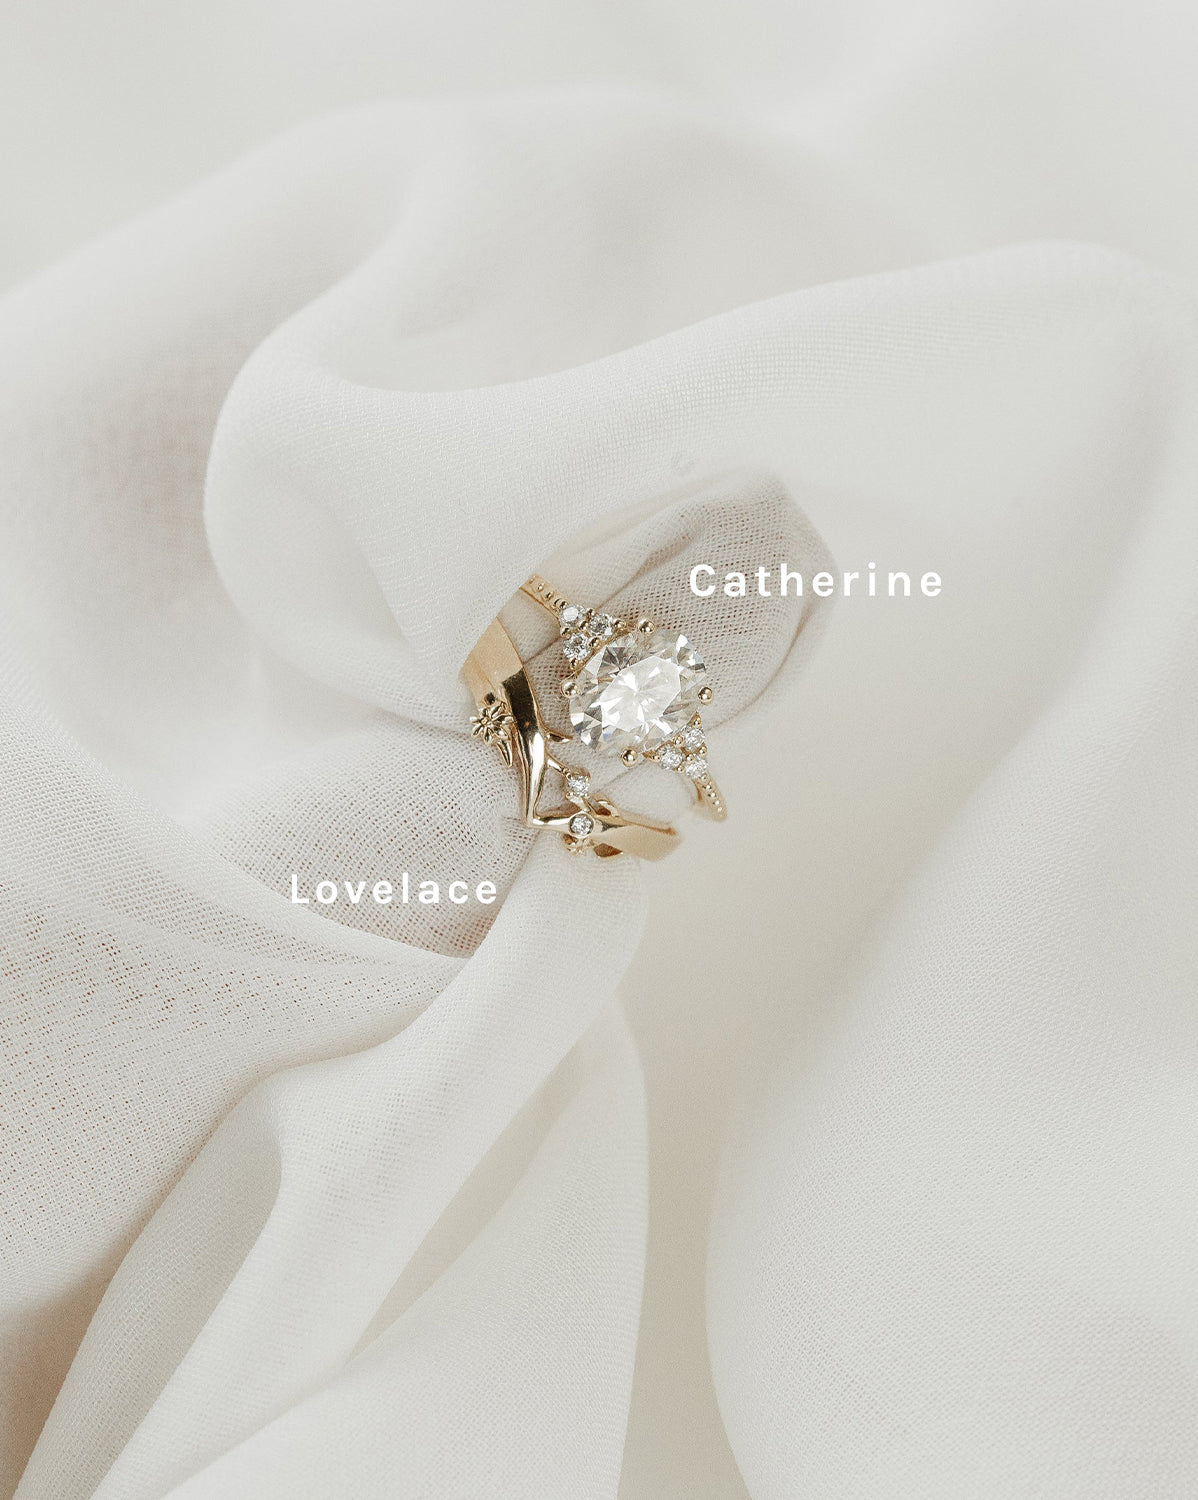 Solid Gold Catherine Oval Ring